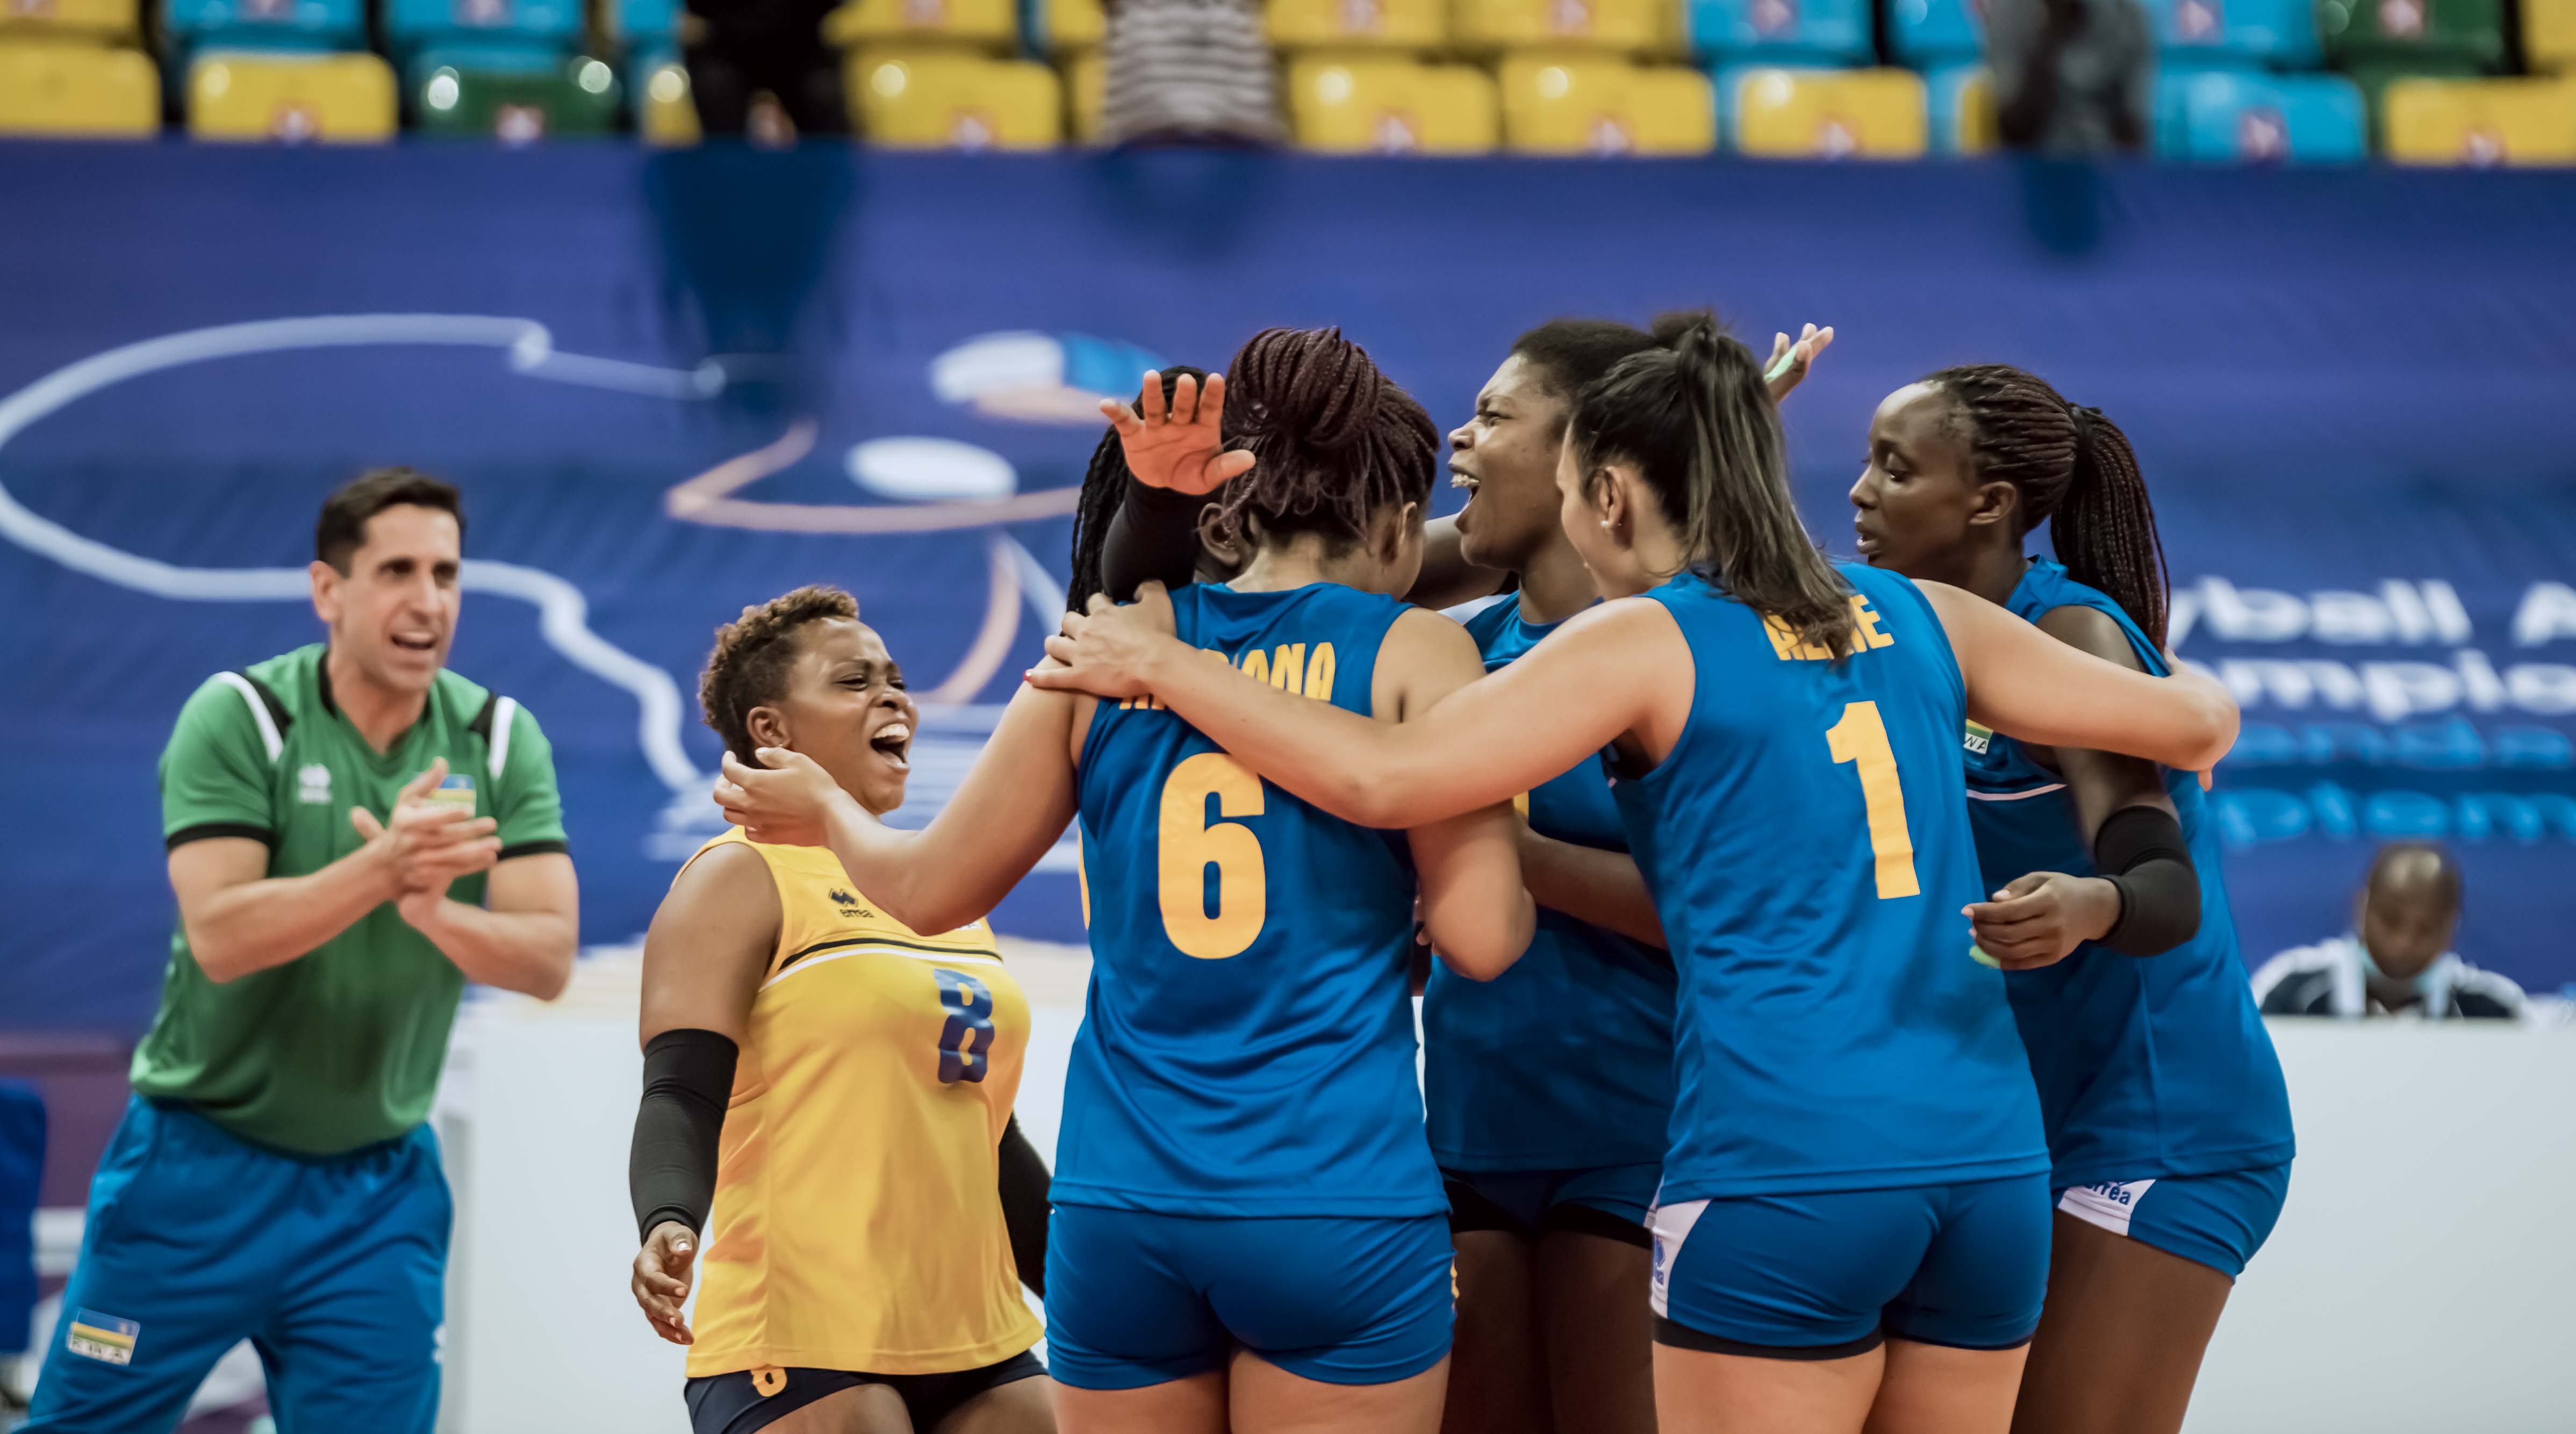 Rwandan players and head coach Paulo de Tarso (L) celebrate after scoring a point in a game against Nigeria on September 13, 2021, at Kigali Arena. File photo